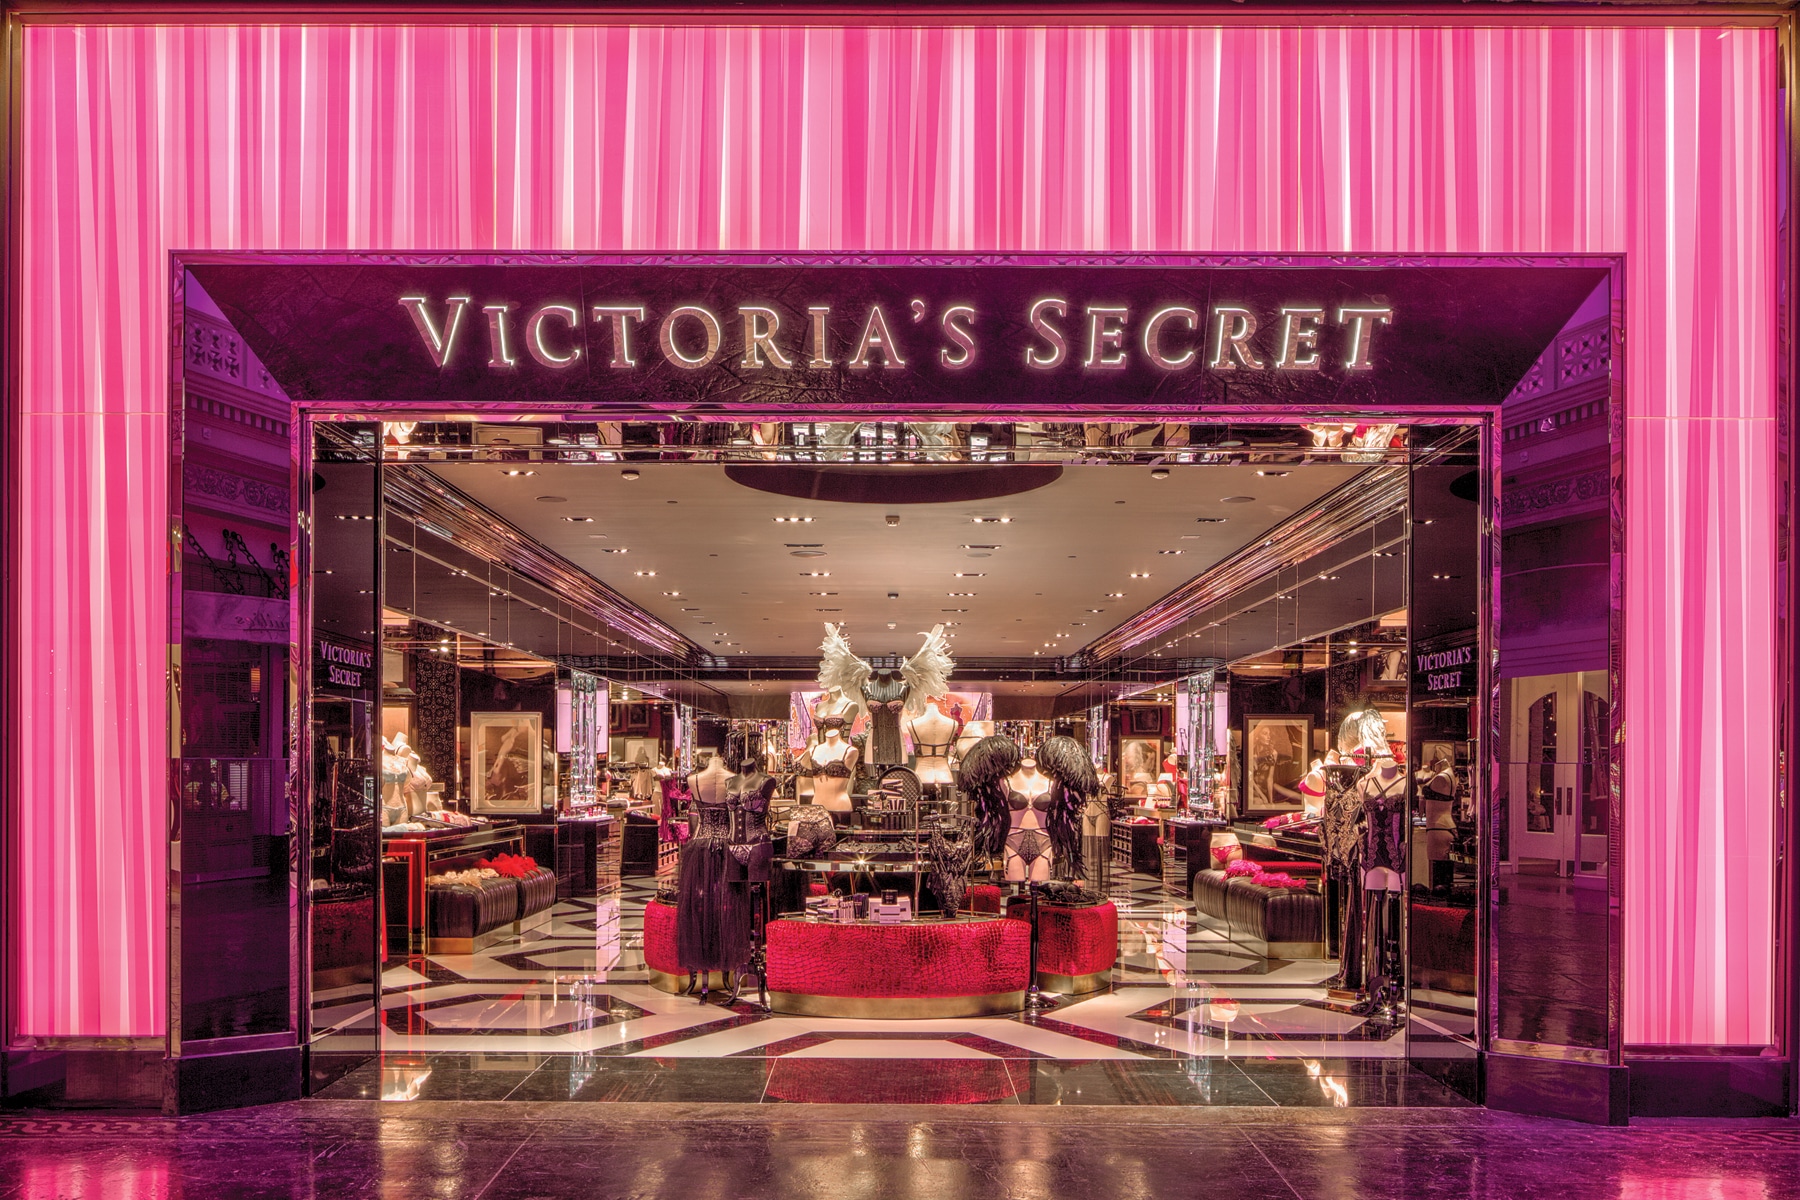 L Brands Spinoff Approved, Name to Change